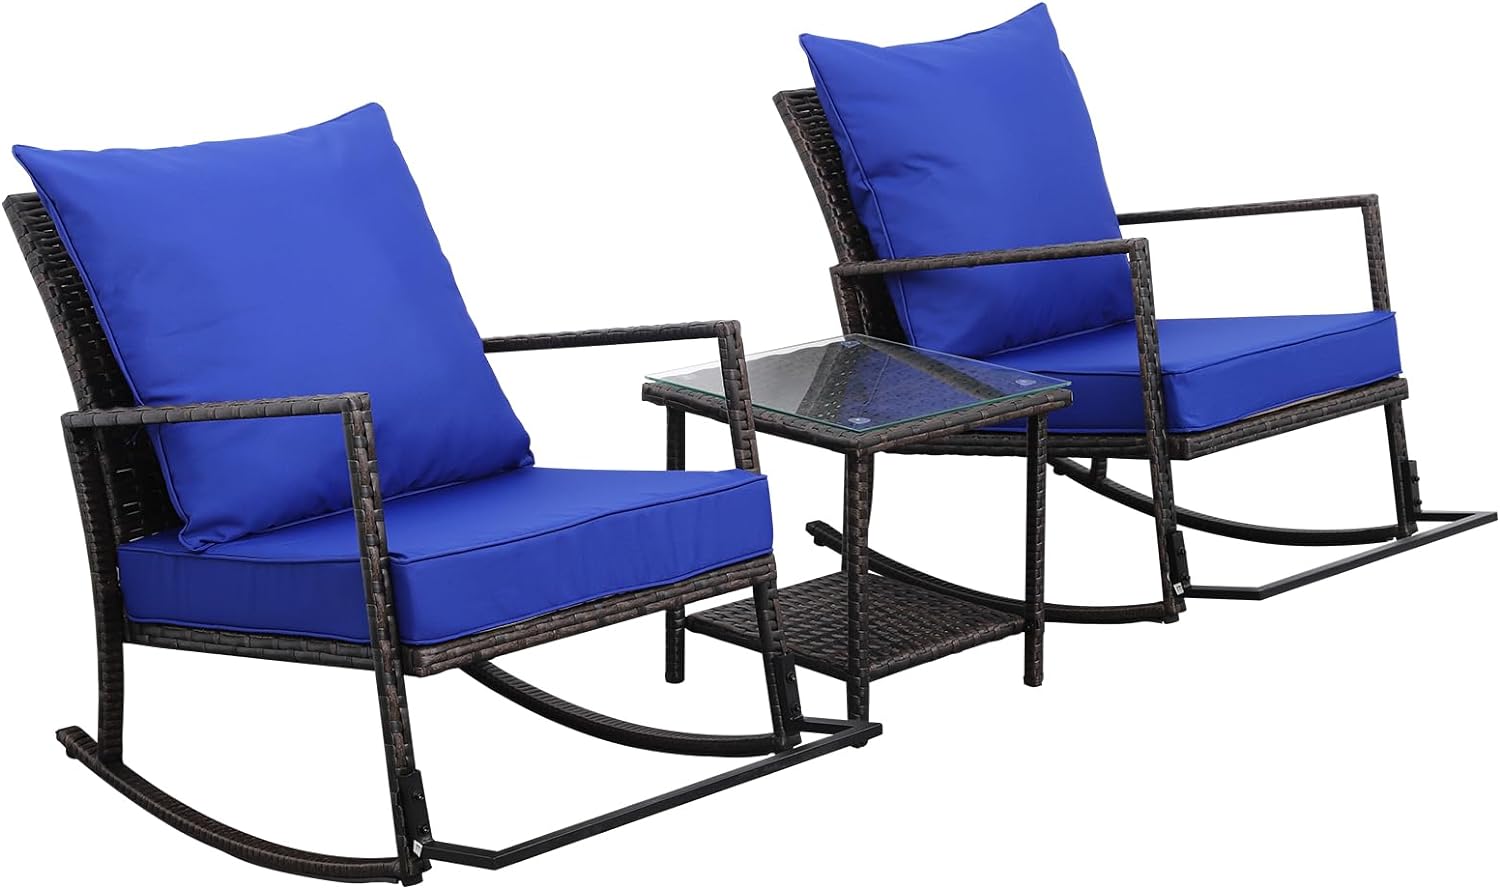 Rattaner Patio Rocking Chair Side Table 3 Pieces Outdoor Chairs Bistro Set with Tempered Glass Coffee Table Outdoor Table and Chairs Anti-Slip Cushions, Royal Blue